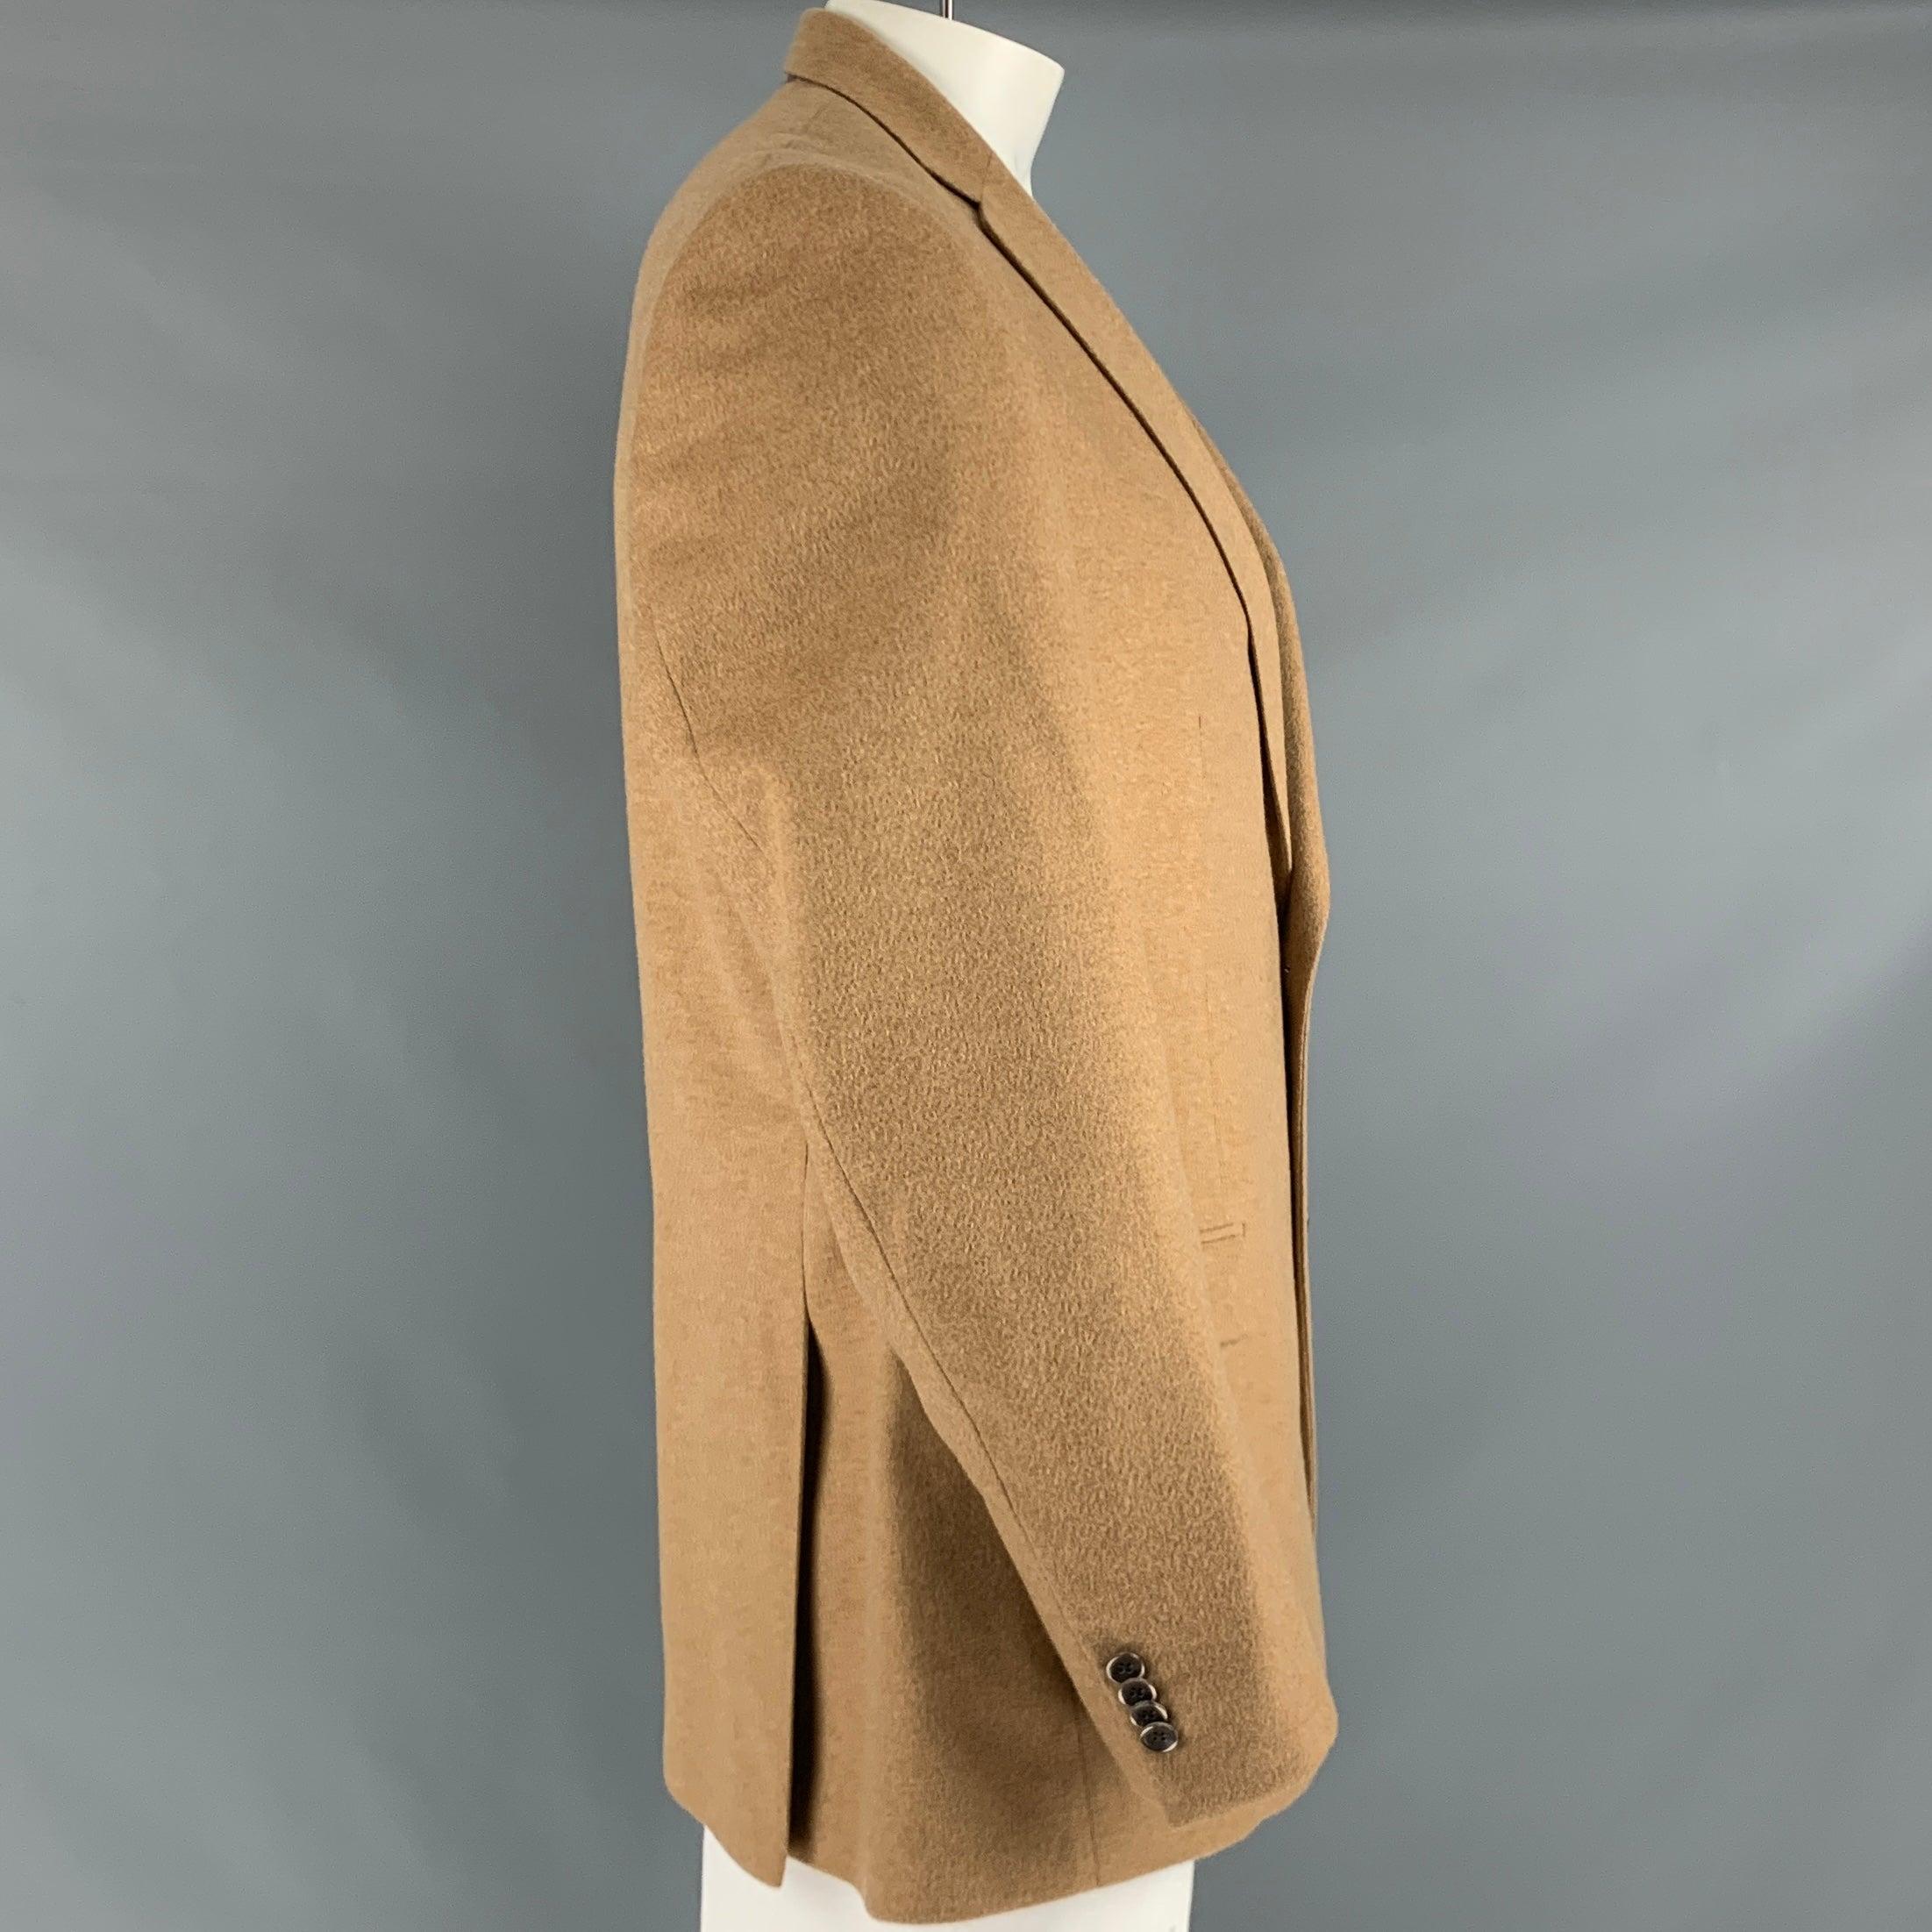 SAKS FIFTH AVENUE sport coat
in a tan cashmere fabric featuring LORO PIANA cashmere, notch lapel, and double button closure. Made in Canada.Excellent Pre-Owned Condition. 

Marked:   44L 

Measurements: 
 
Shoulder: 18.5 inches Chest: 44 inches